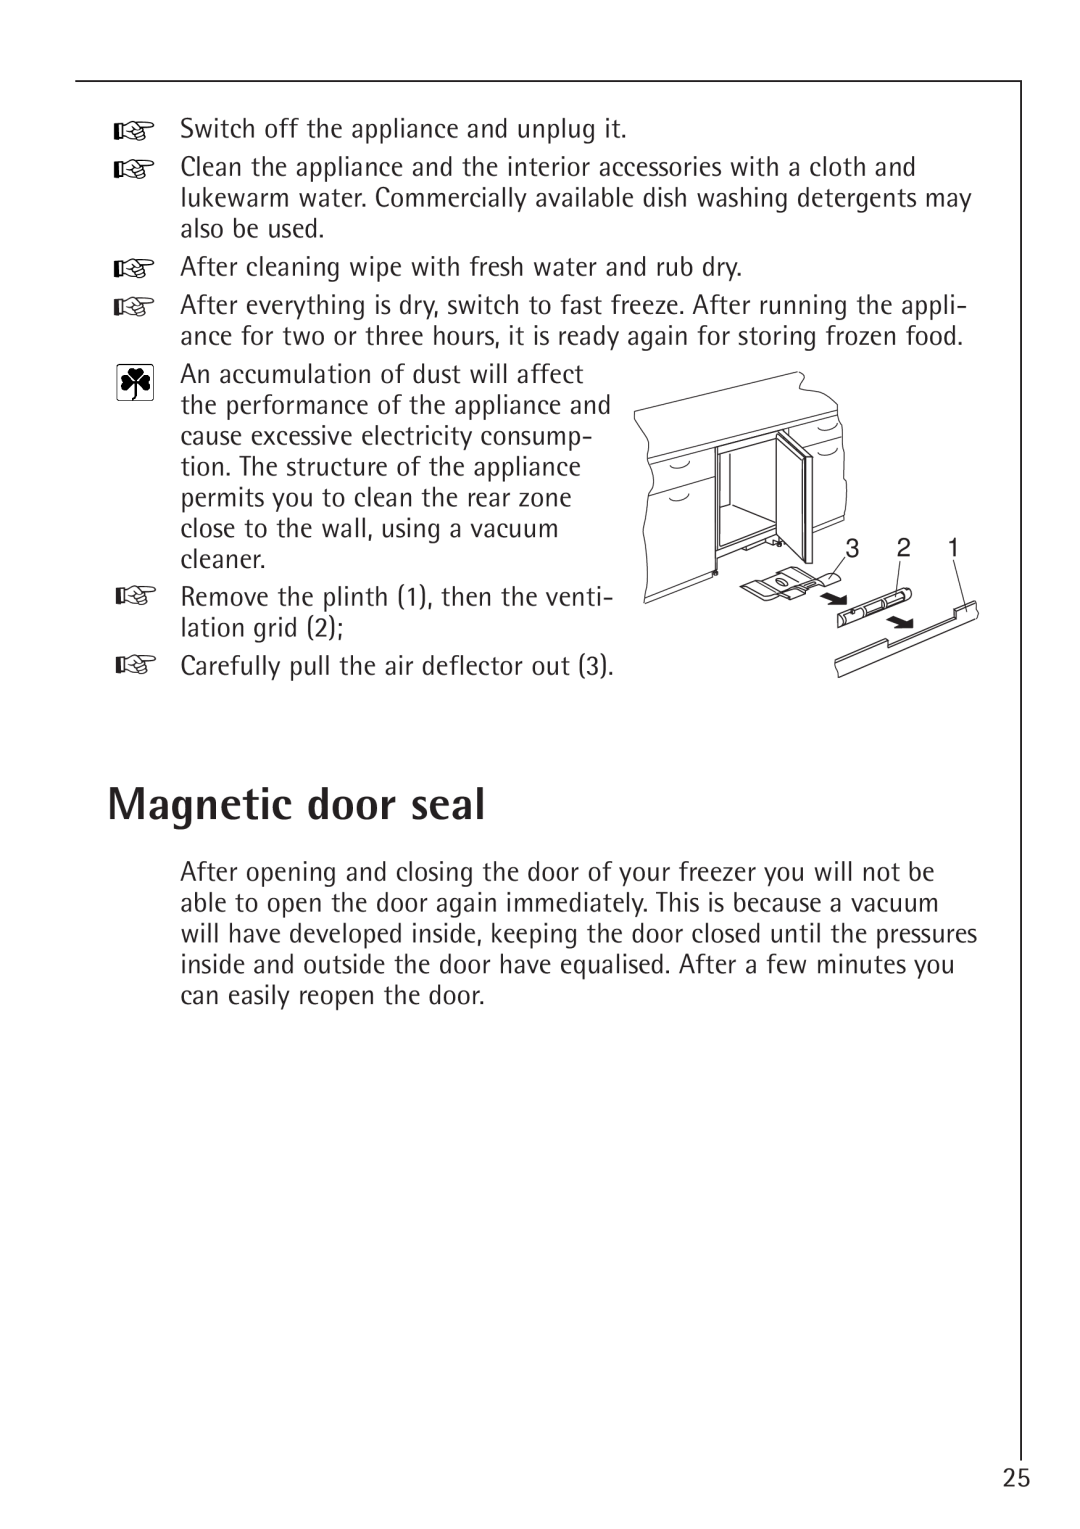 Electrolux 66050i installation instructions Magnetic door seal 